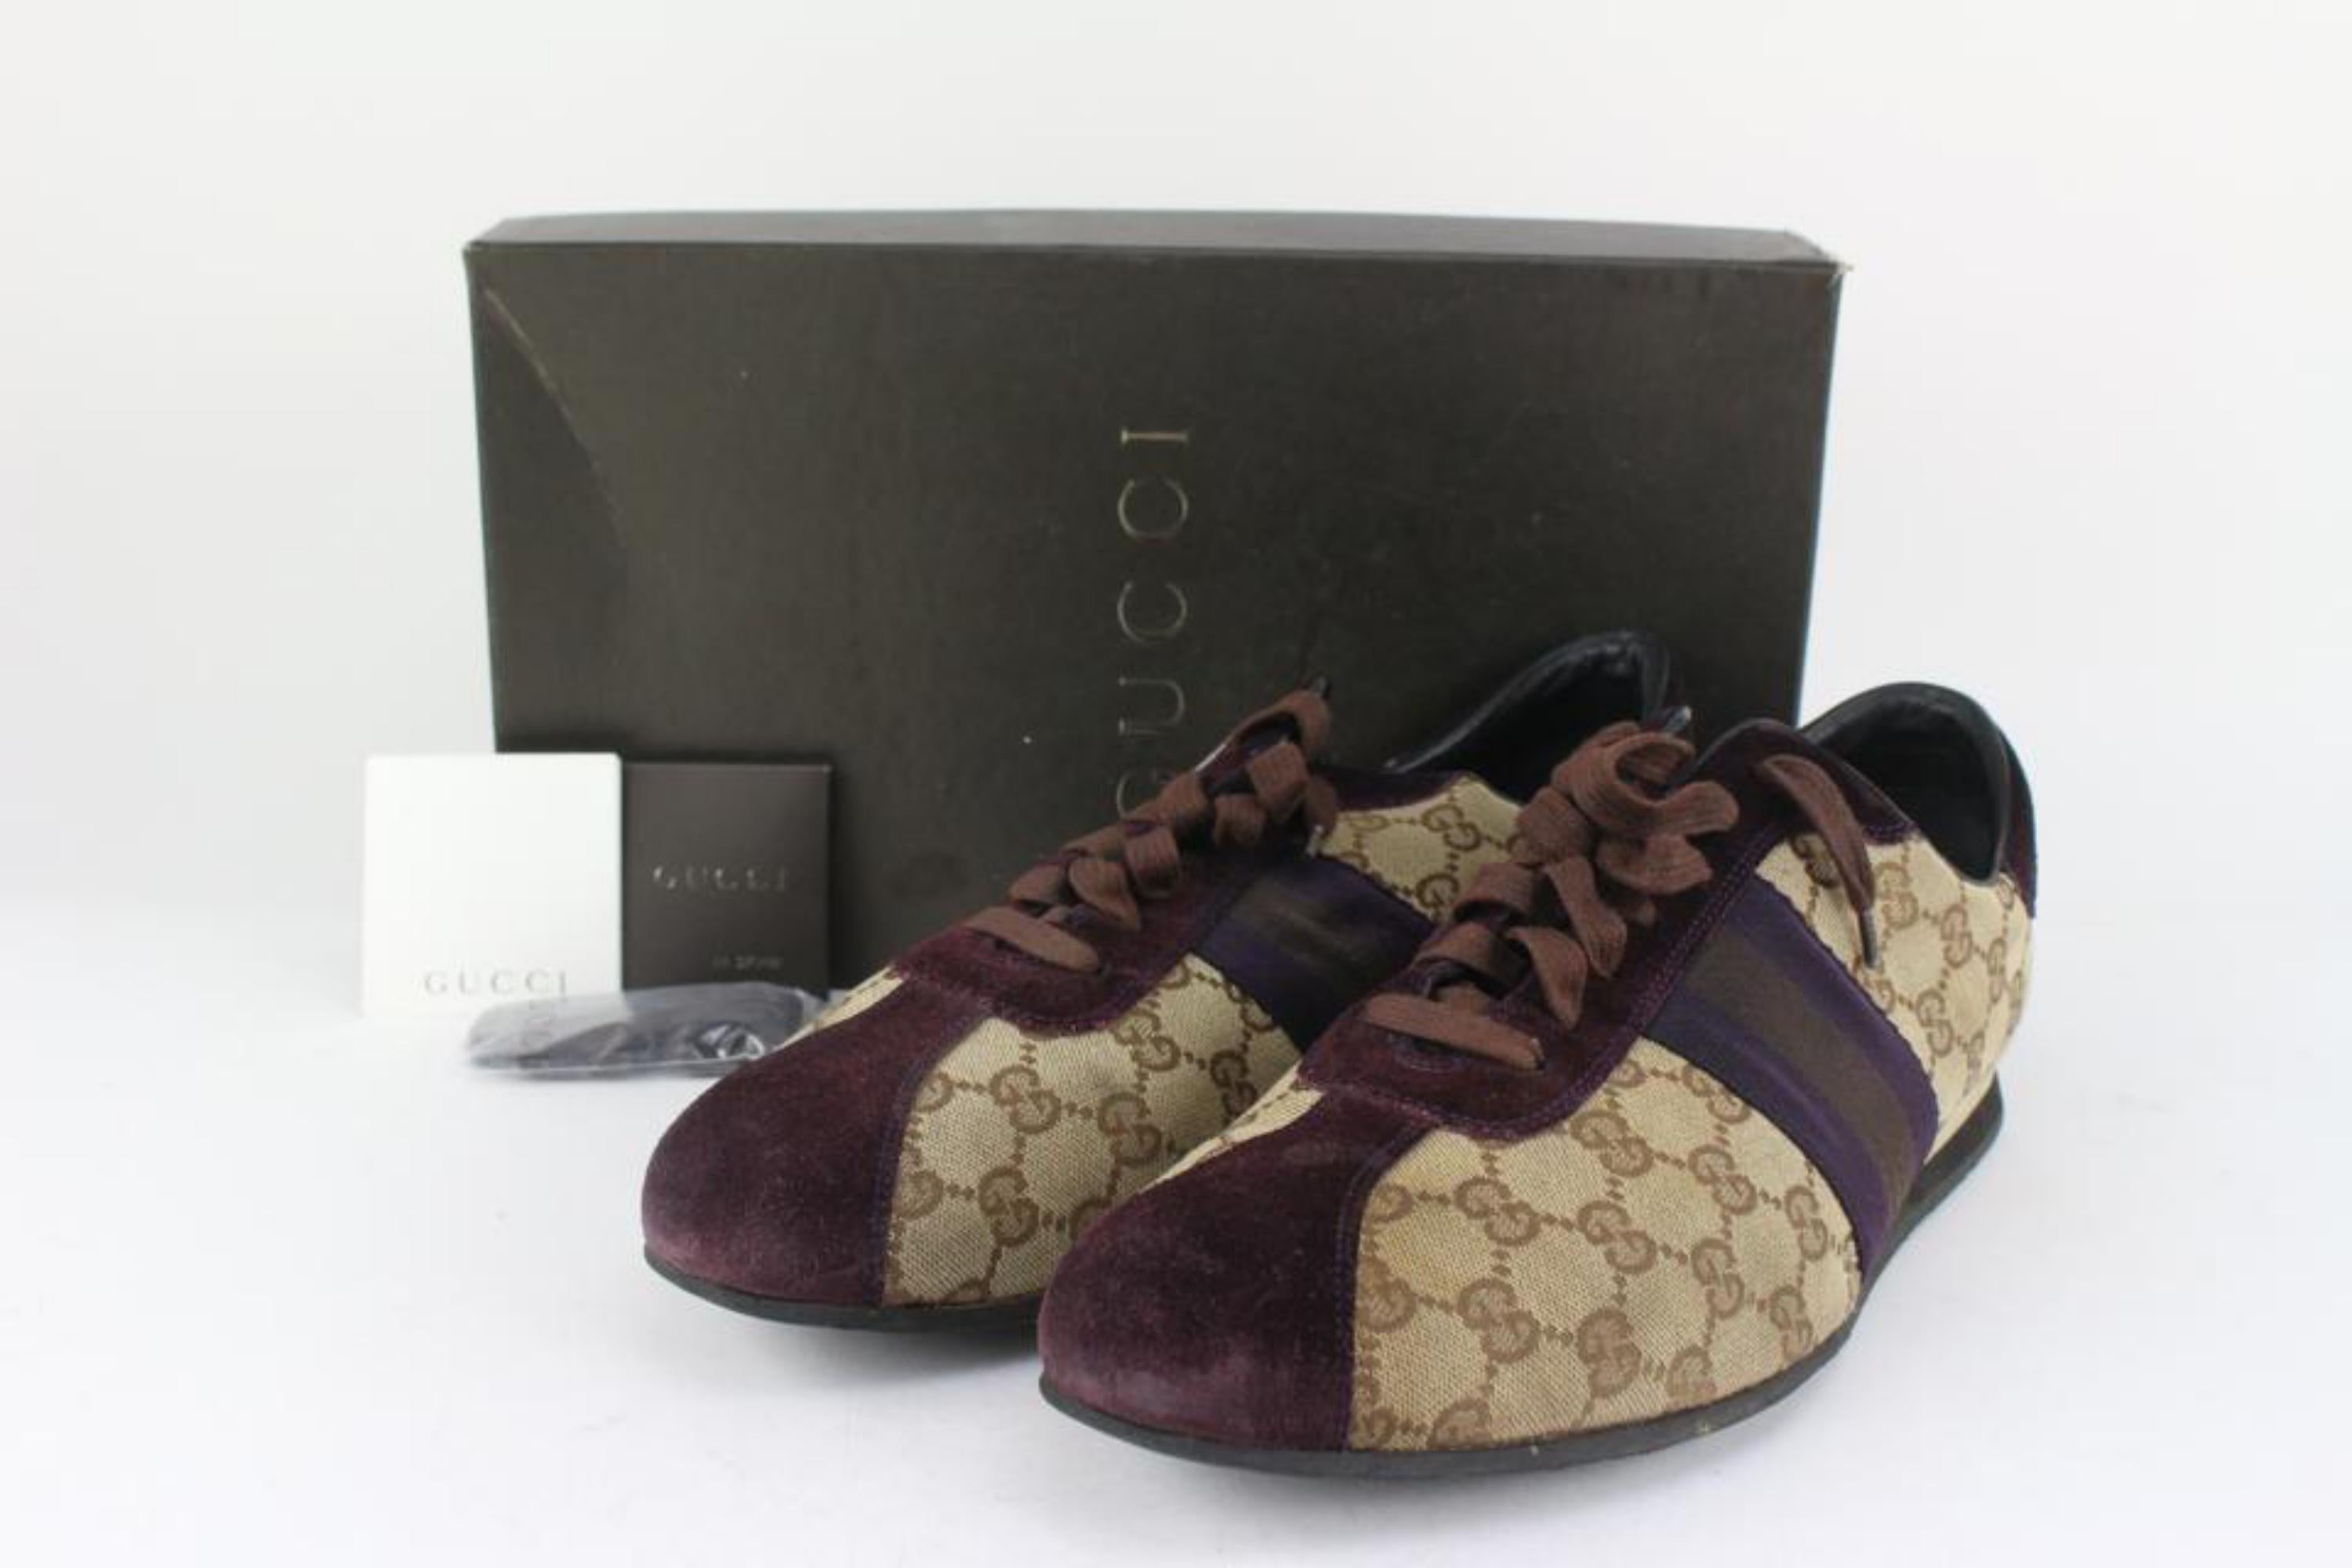 Gucci Men's US 12.5 Monogram GG Web Sneaker  1GG415G
Date Code/Serial Number: 11771
Made In: Italy
Measurements: Length:  12.5